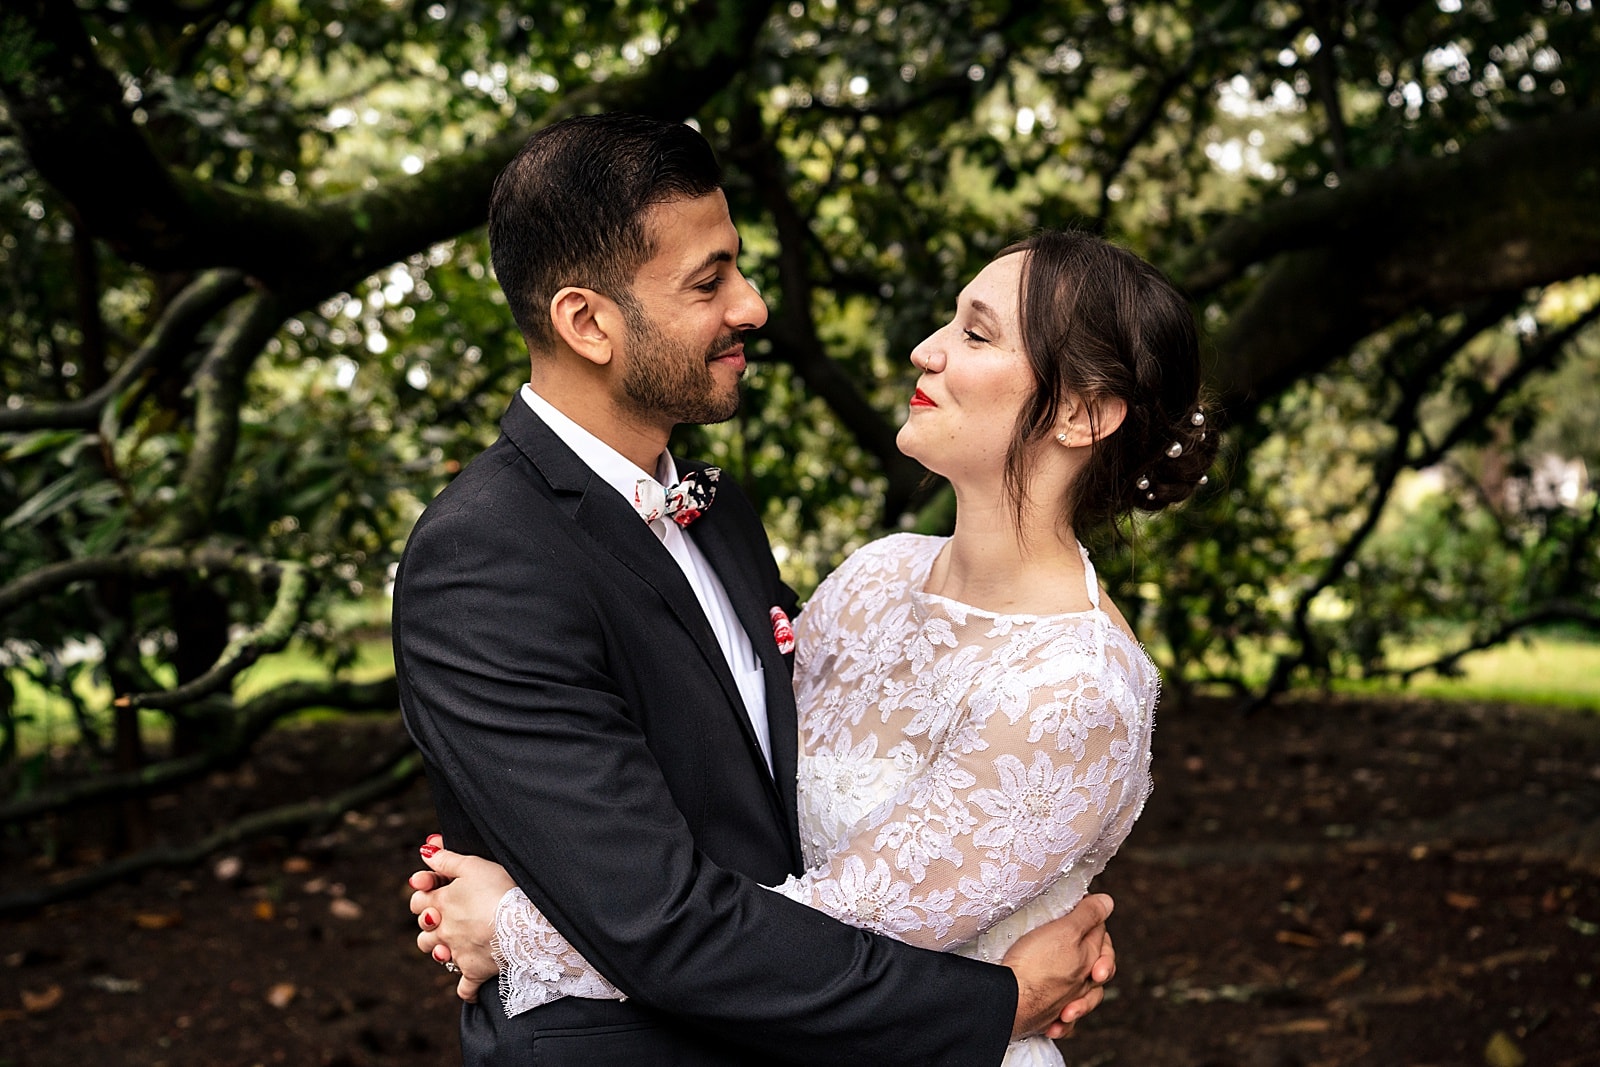 this bride wore her grandmother's wedding gown and it had stunning lace and pearl detail!